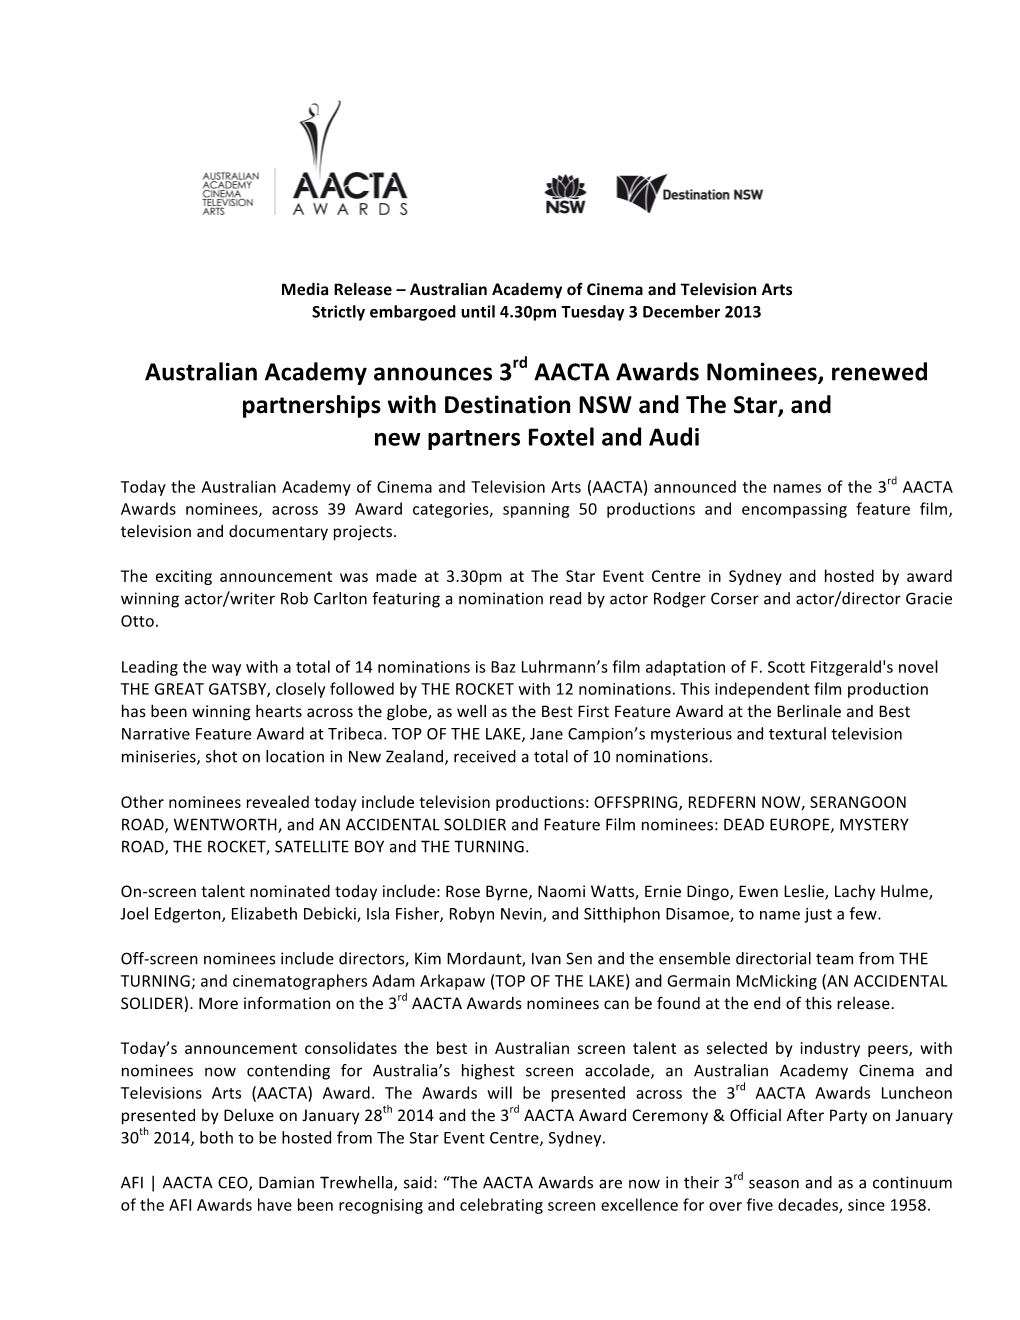 Australian Academy Announces 3Rd AACTA Awards Nominees, Renewed Partnerships with Destination NSW and the Star, and New Partners Foxtel and Audi